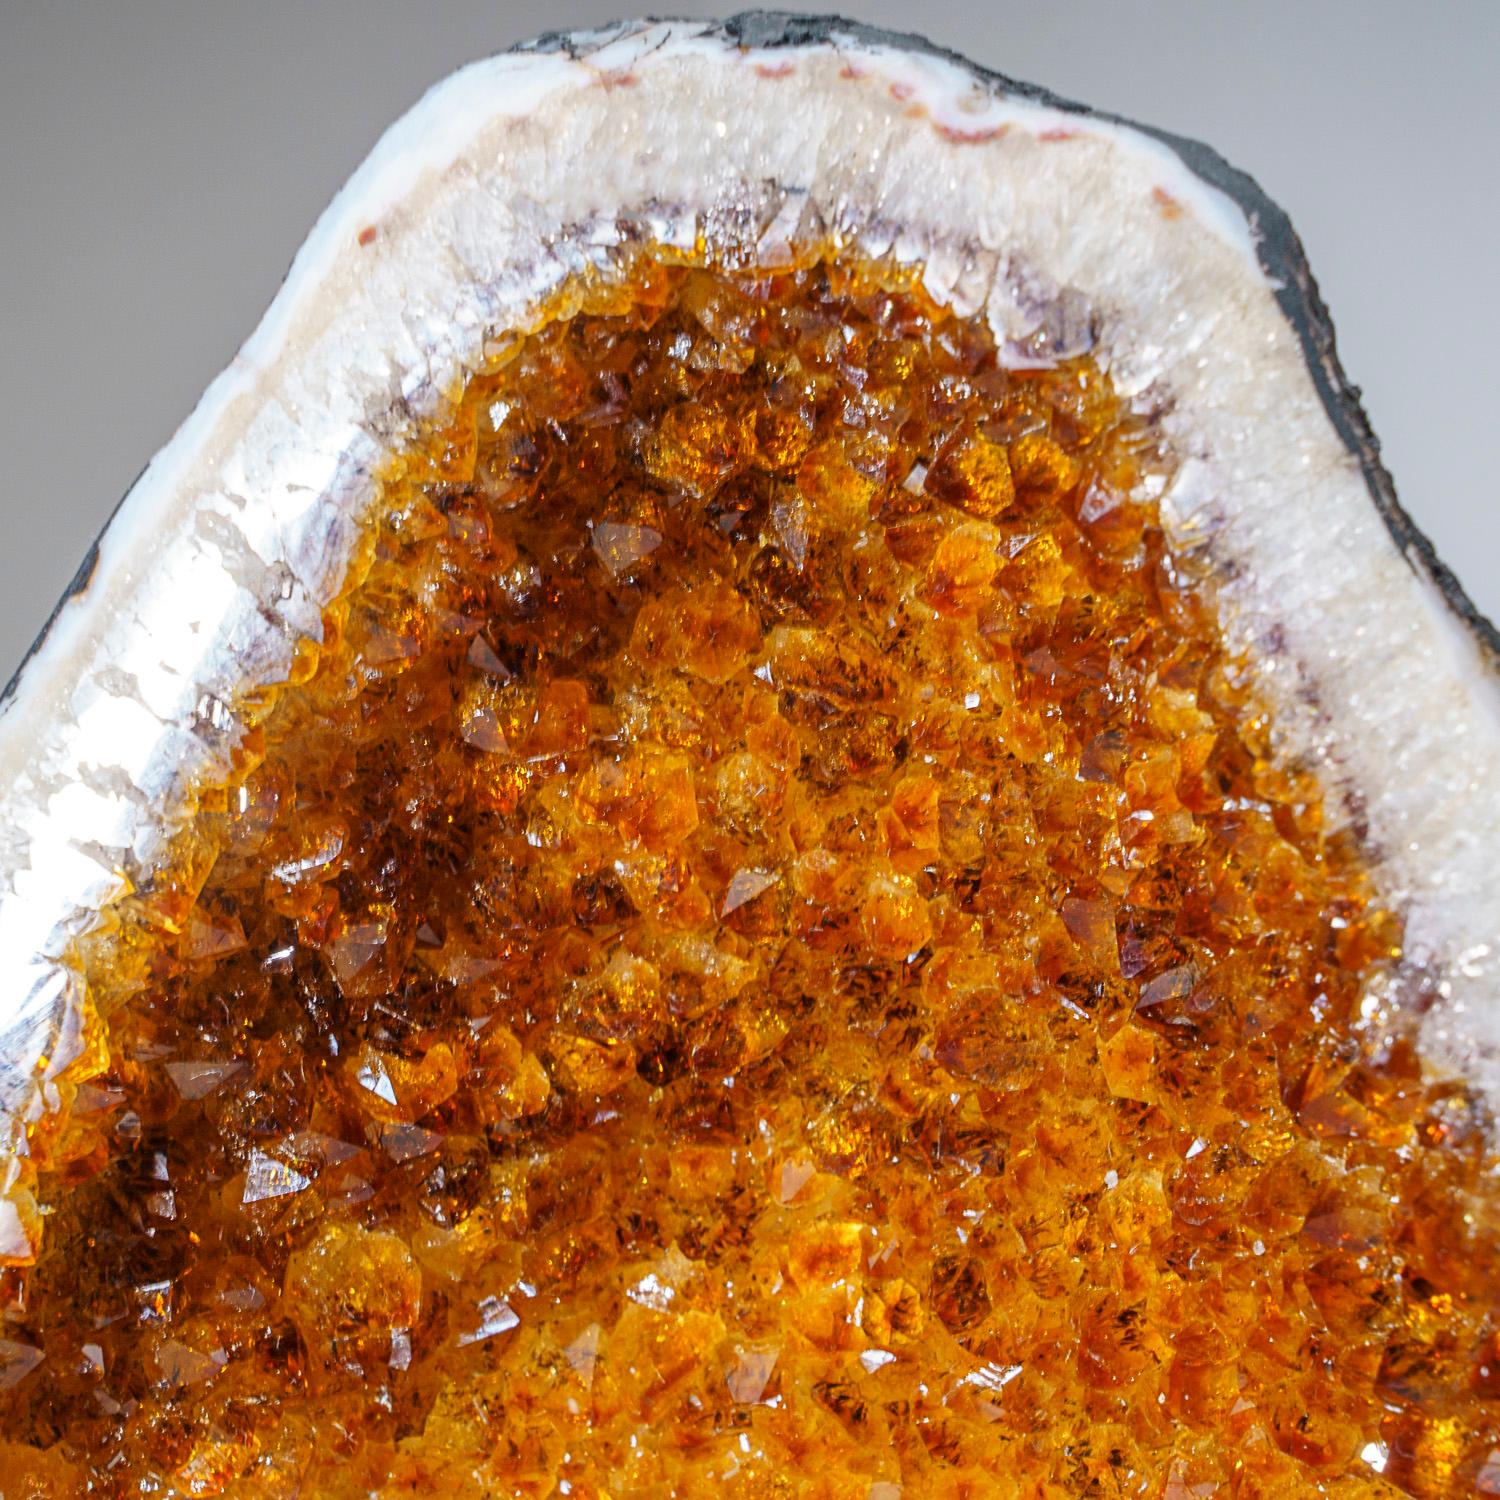 AAA museum quality, large Brazilian citrine geode lined with extra large lustrous, transparent to translucent, golden citrine quartz crystals. This beautiful specimen has vibrant orange/yellow color with highly reflective terminated faces.

Sunny